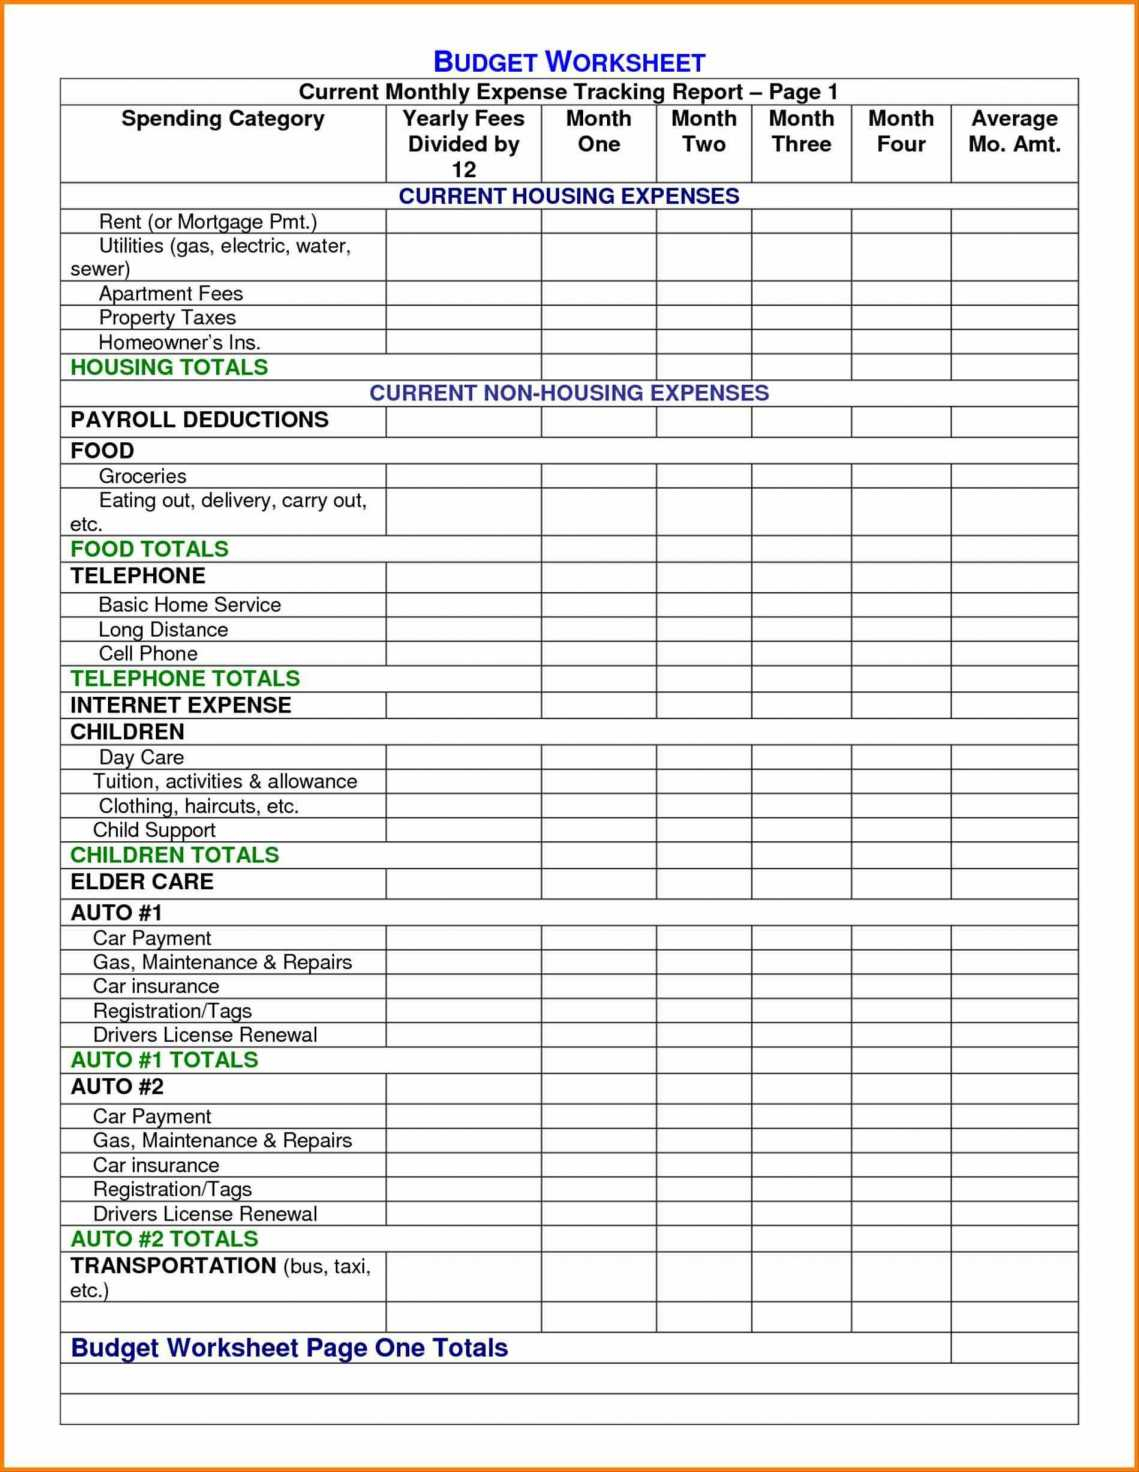 Bookkeeping For Self Employed Spreadsheet Spreadsheete For Small With Simple Bookkeeping Spreadsheet